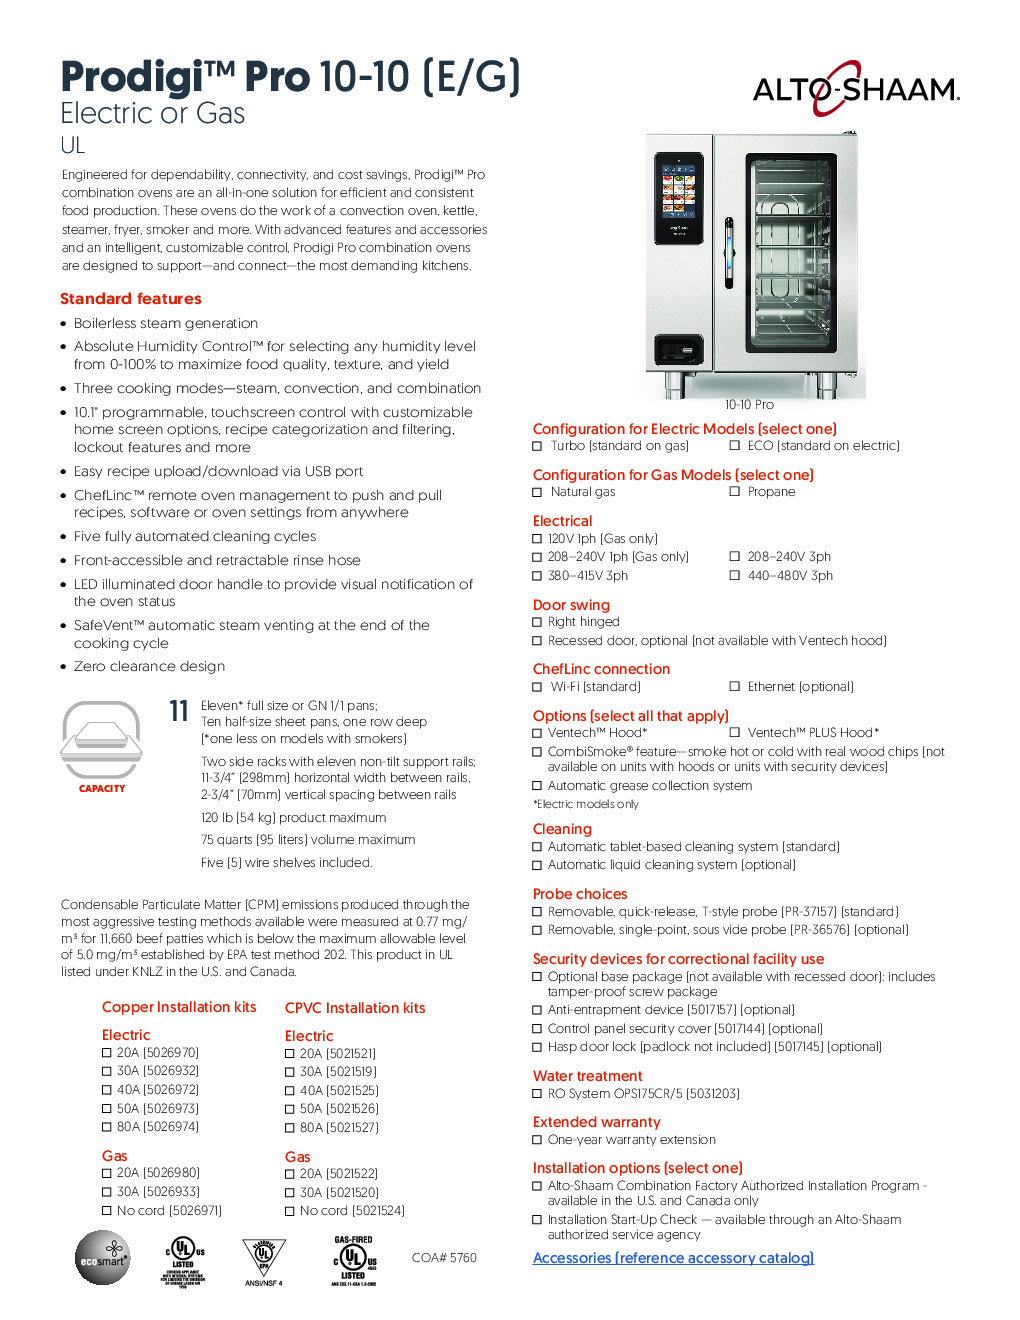 Alto-Shaam 10-10G PRO Gas Combi Oven, 11 Full Size Pan Capacity, Wifi Enabled Control